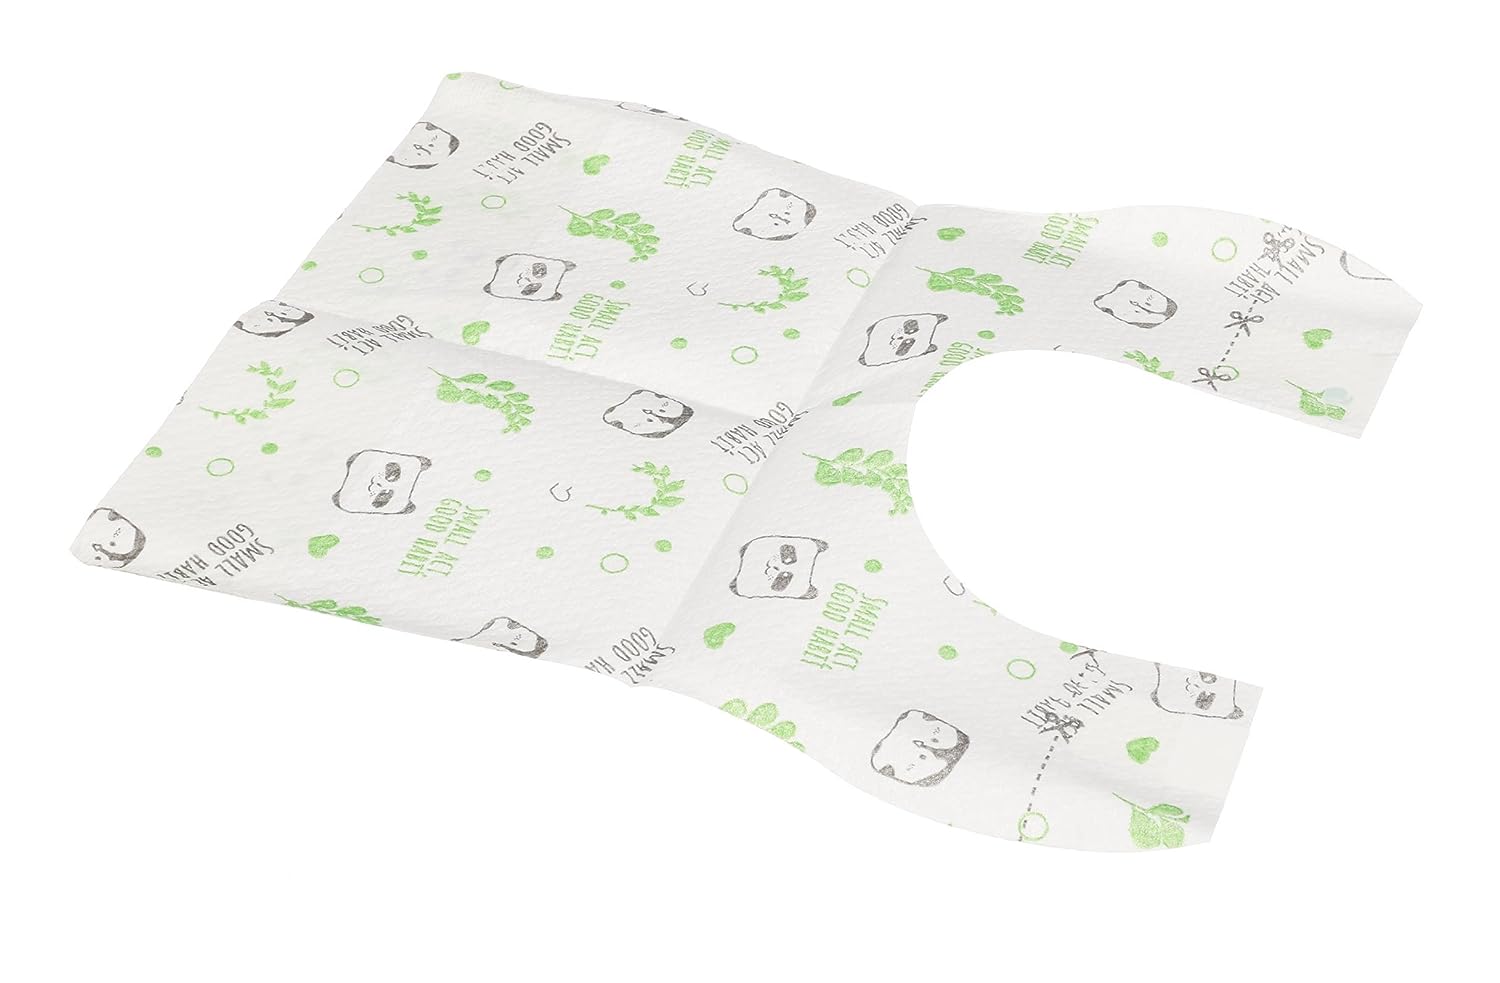 Chicco Disposable Bibs Compostable Ecological Bibs Absorbent and Waterproof Weaning Bibs for Babies and Toddlers for Home and Travel - Baby Bliss